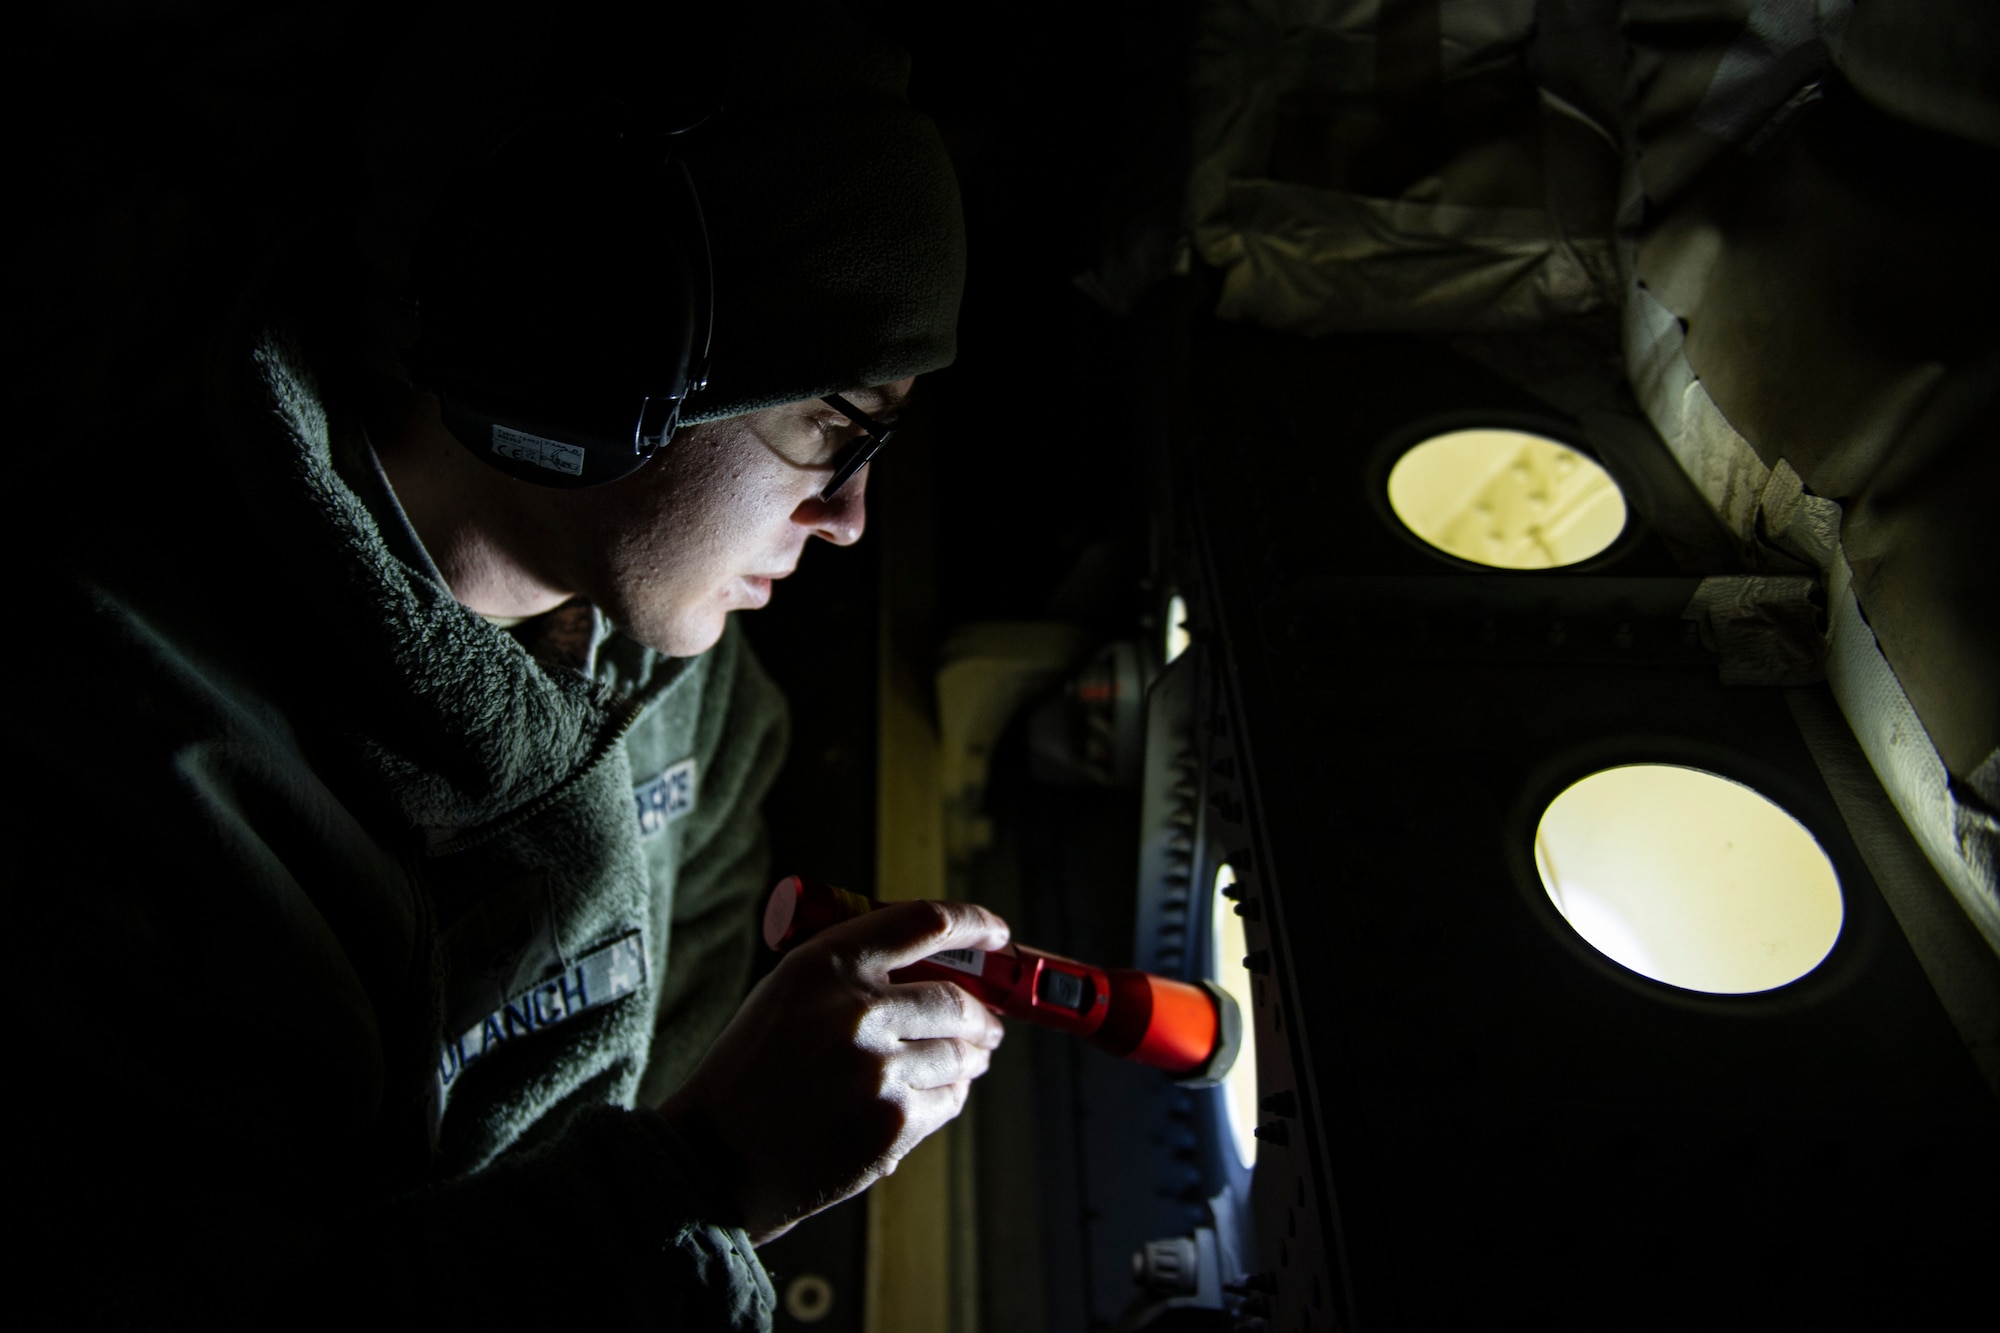 Senior Airman Joey Ulanch, 911th Maintenance Squadron aircraft structural maintenance technician, inspects metal on the inside of a C-17 Globemaster III for any kind of damage during a Home Station Check inspection at the Pittsburgh International Airport Air Reserve Station, Pennsylvania, May 9, 2020.